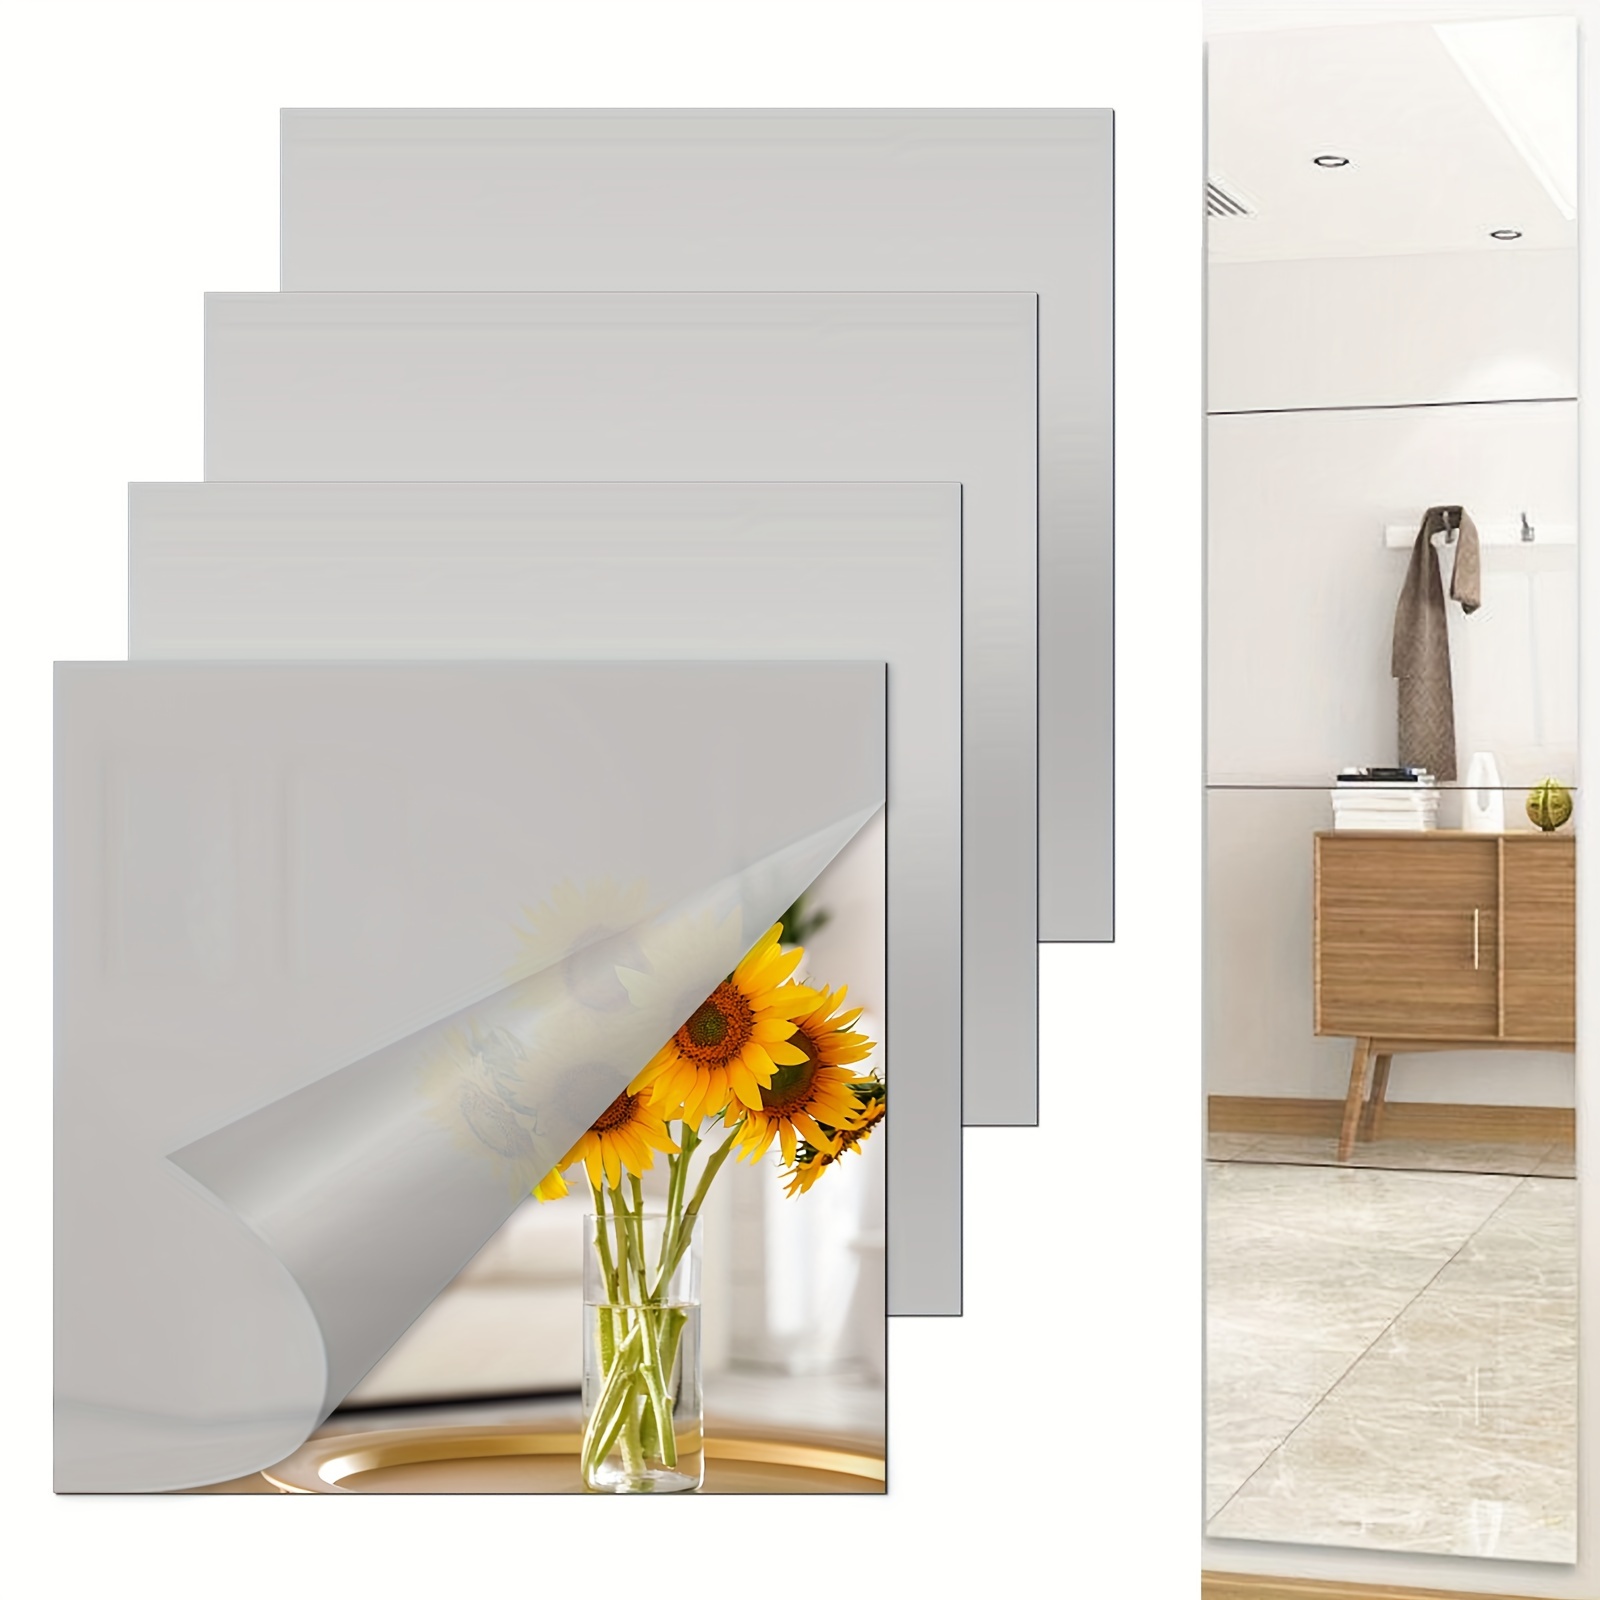 40 Pieces Flexible Mirror Sheets 6 x 9 Inch, 6 x 6 Inch Self Adhesive  Mirror Tiles Non Glass Mirror Stickers Shatterproof Soft Mirror Wall  Sticker